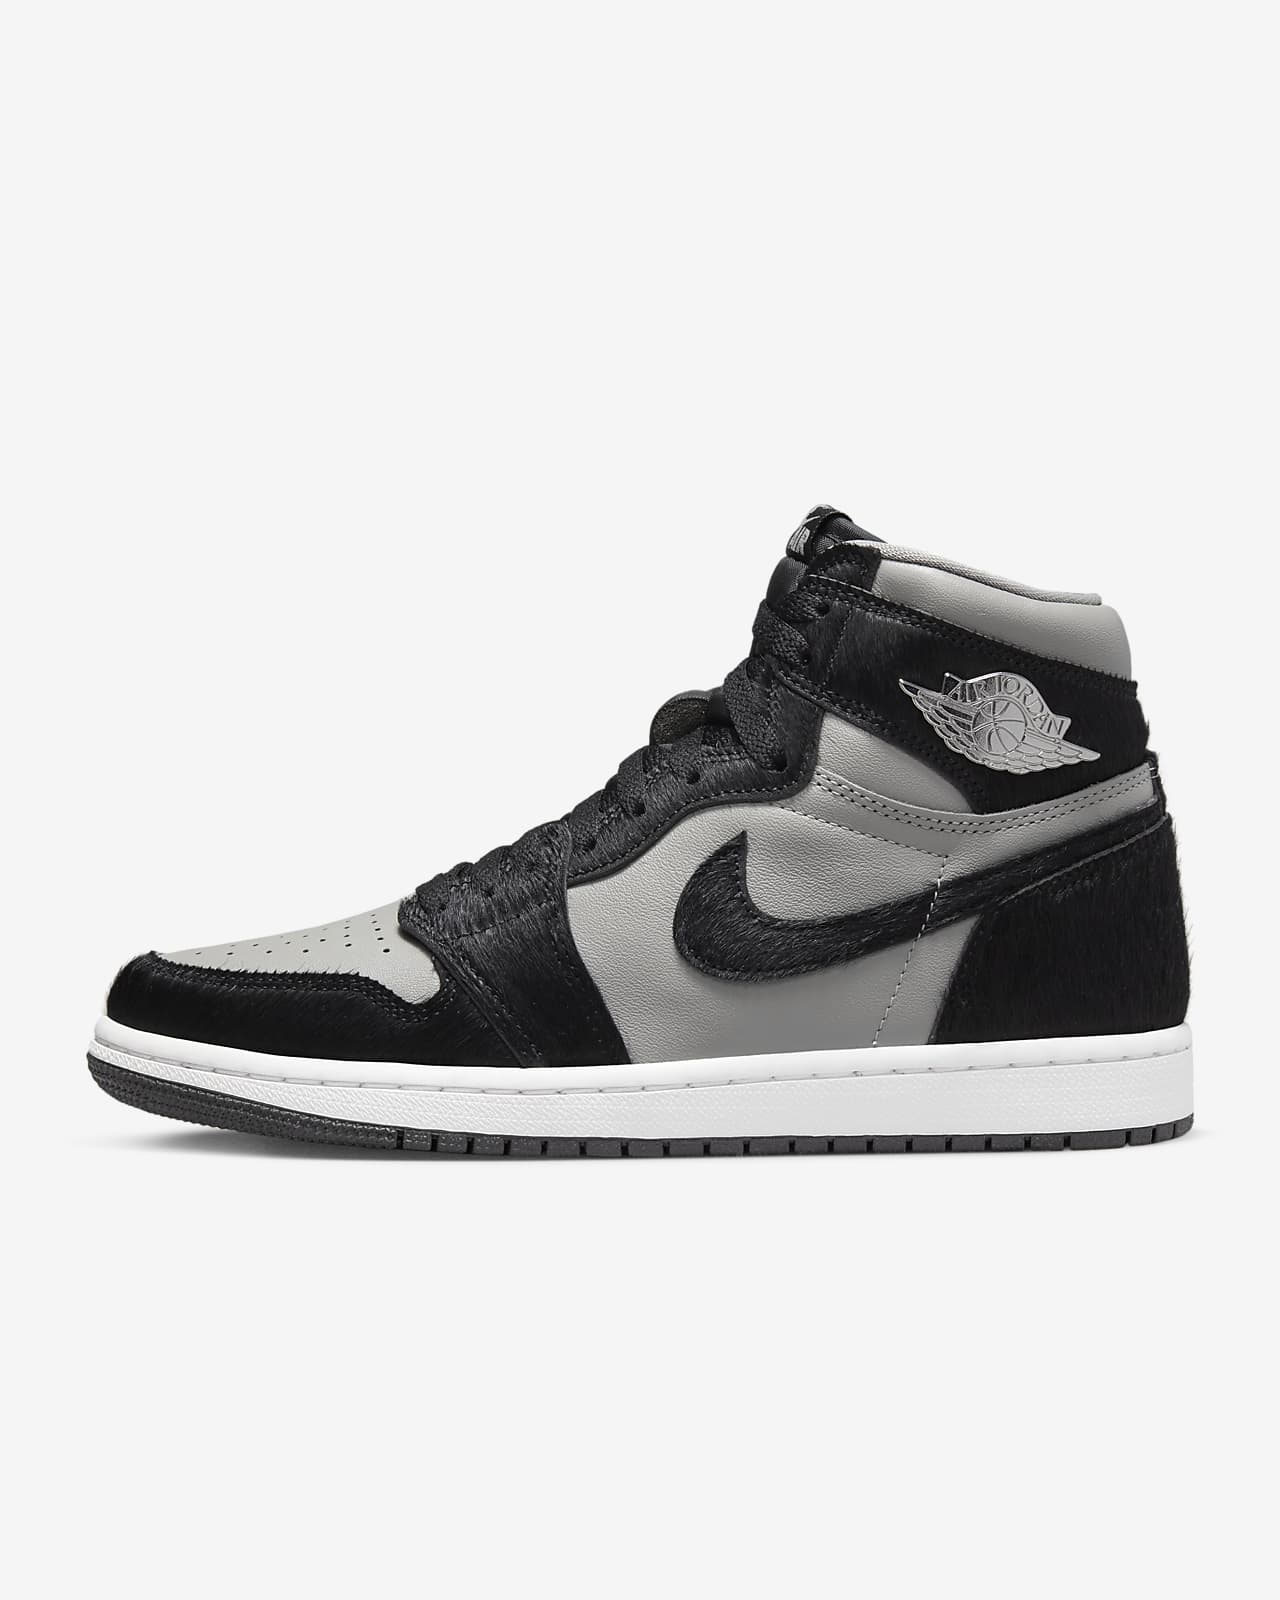 prejudice tent Person in charge of sports game Air Jordan 1 Retro High Women's Shoes. Nike.com